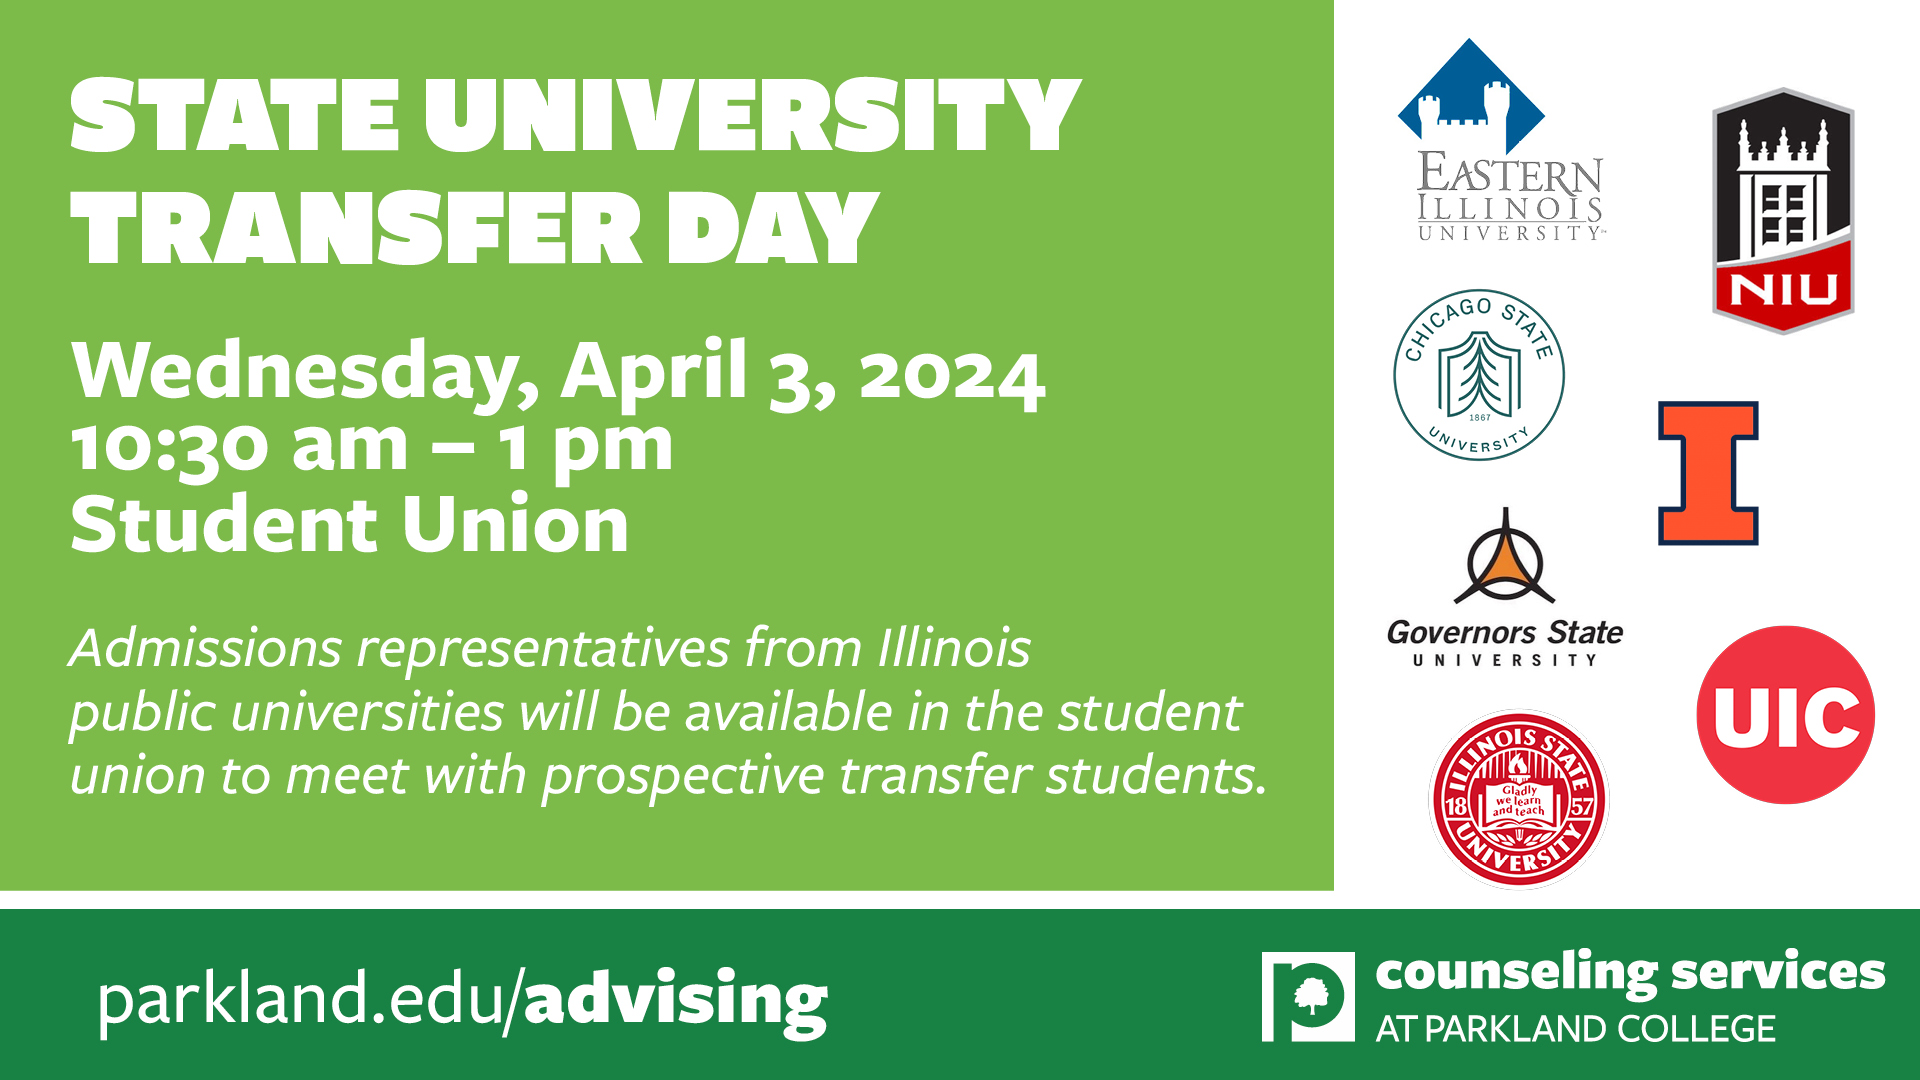 State University Transfer Day Wednesday April 3 from 10:30 to 1 pm in the Student Union. Admissions representatives from IL public universities will be available to meet with prospective transfers.